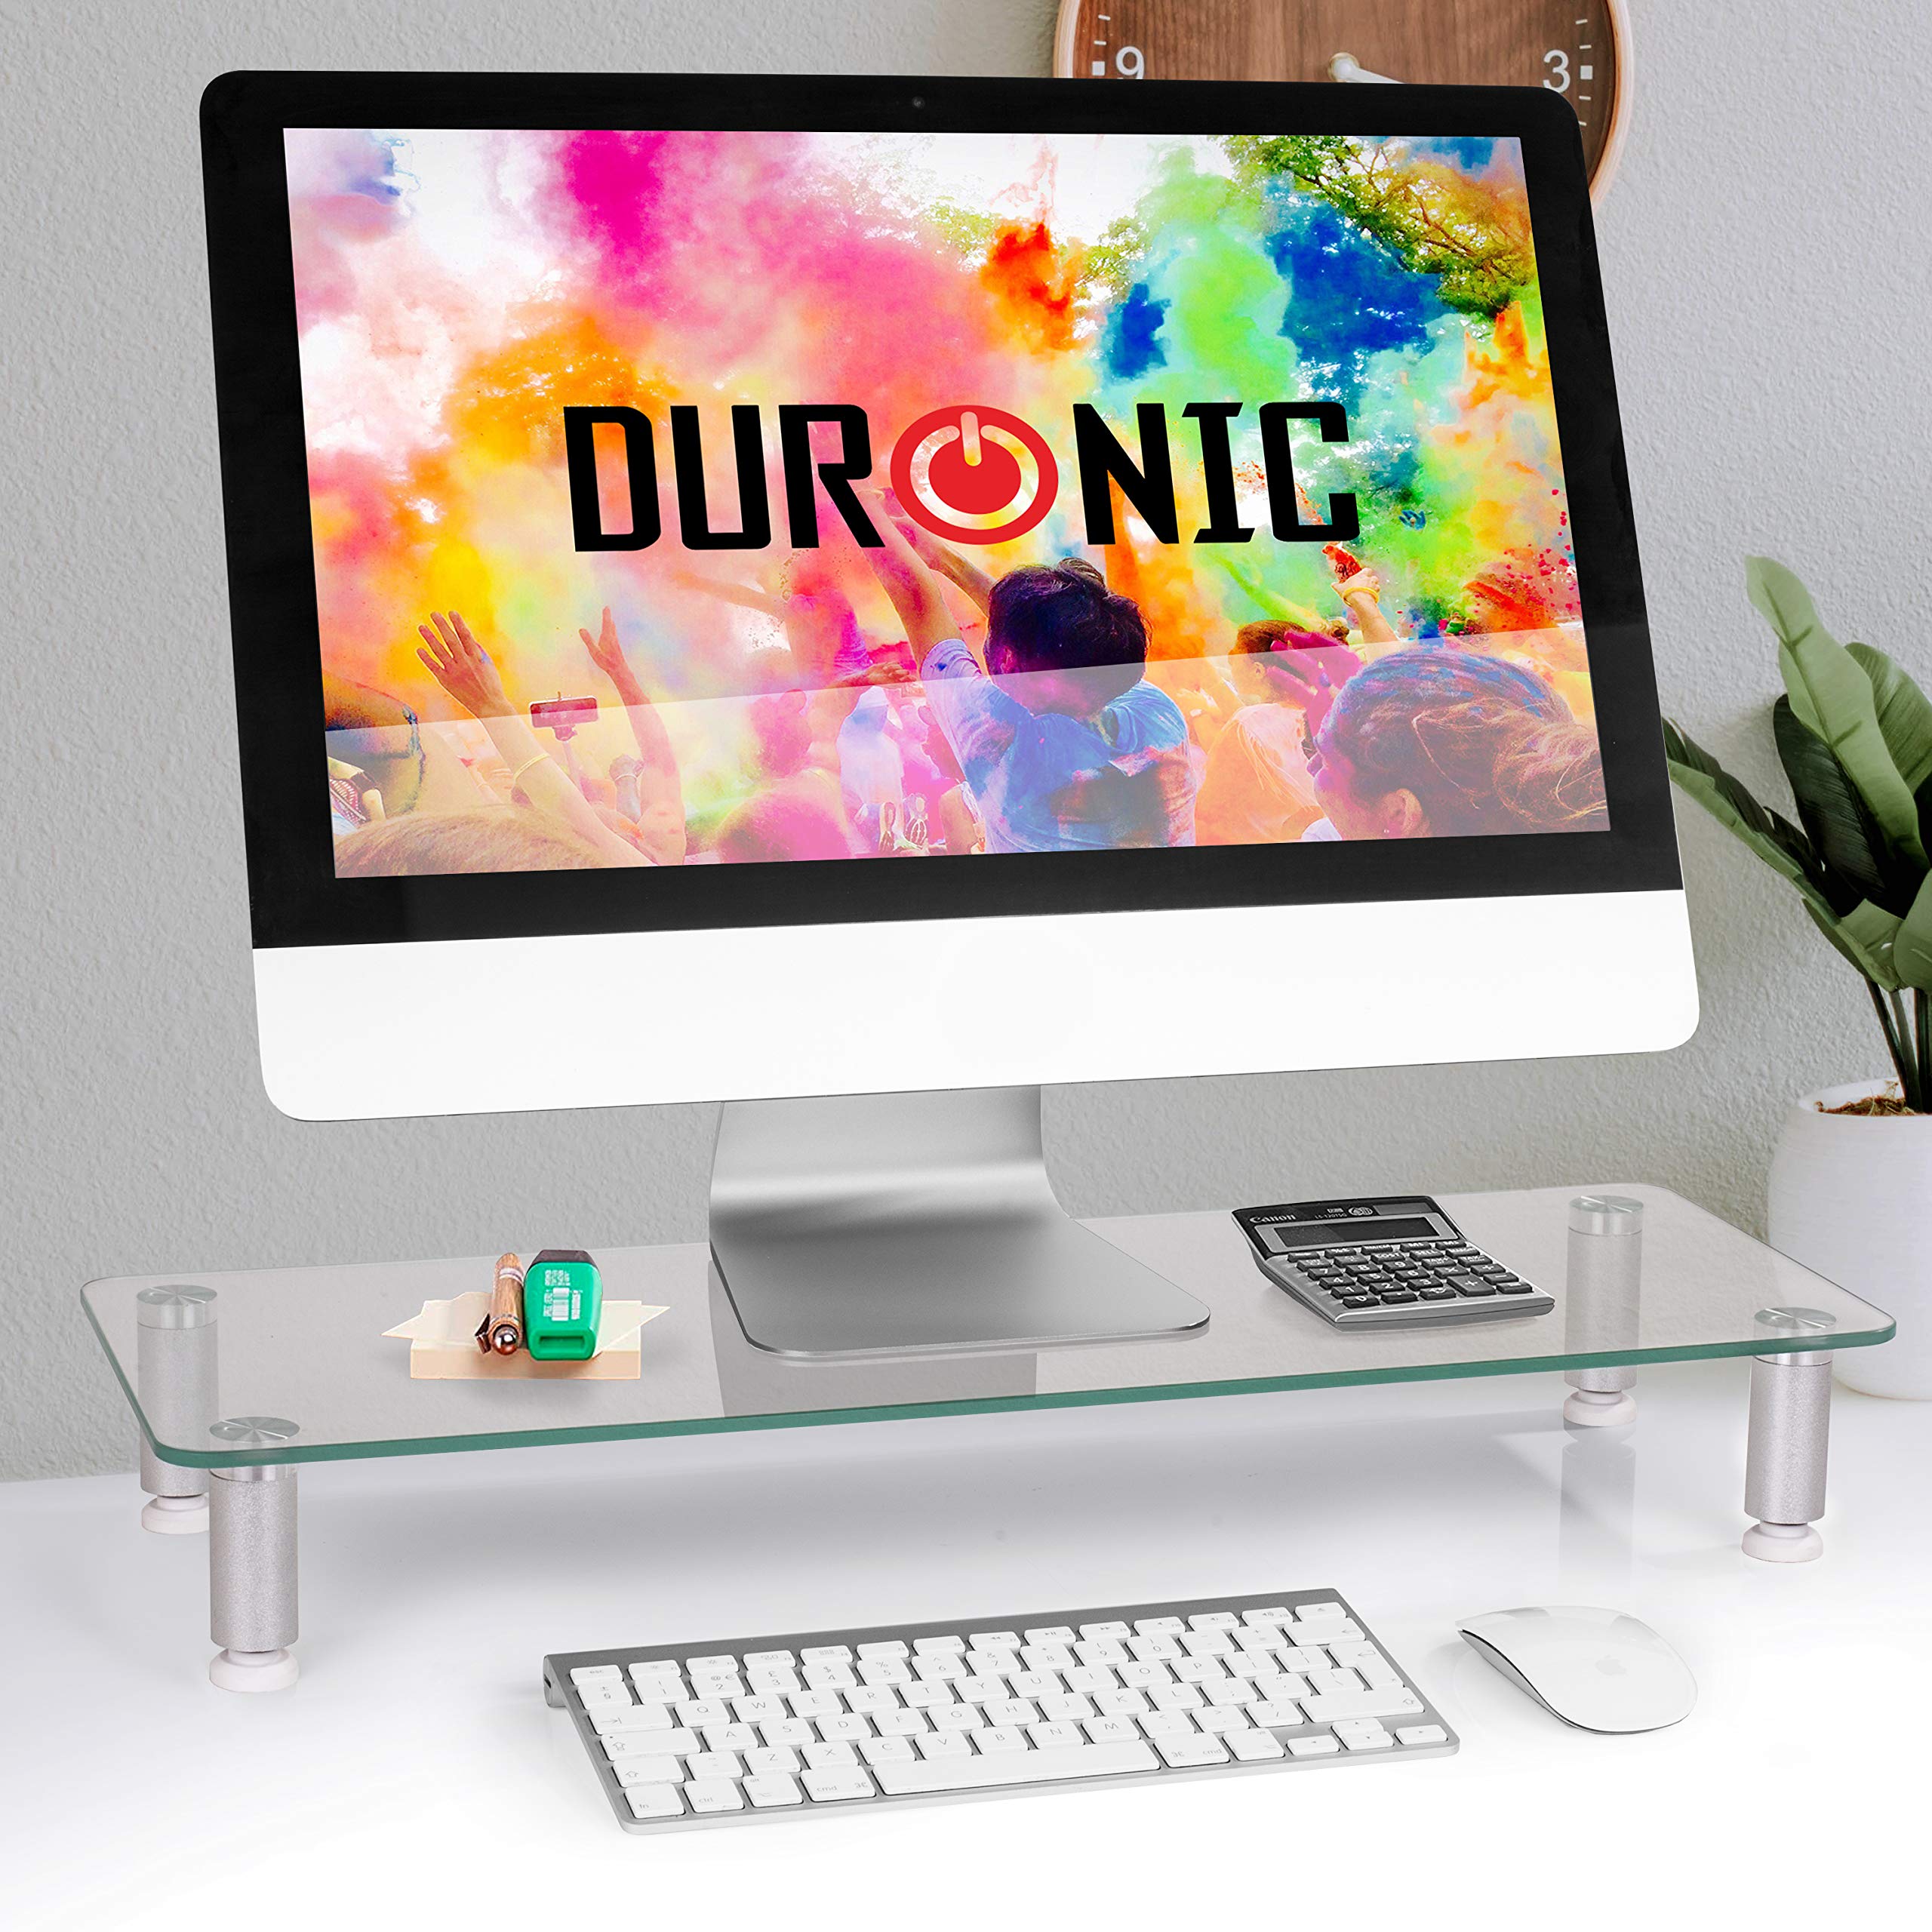 Duronic Monitor Stand Riser DM052-3 | Laptop and Screen Stand for Desktop | Clear Tempered Glass | Support for a TV or PC Computer Monitor | Ergonomic Office Desk Shelf | 20kg Capacity | 70cm x 24cm